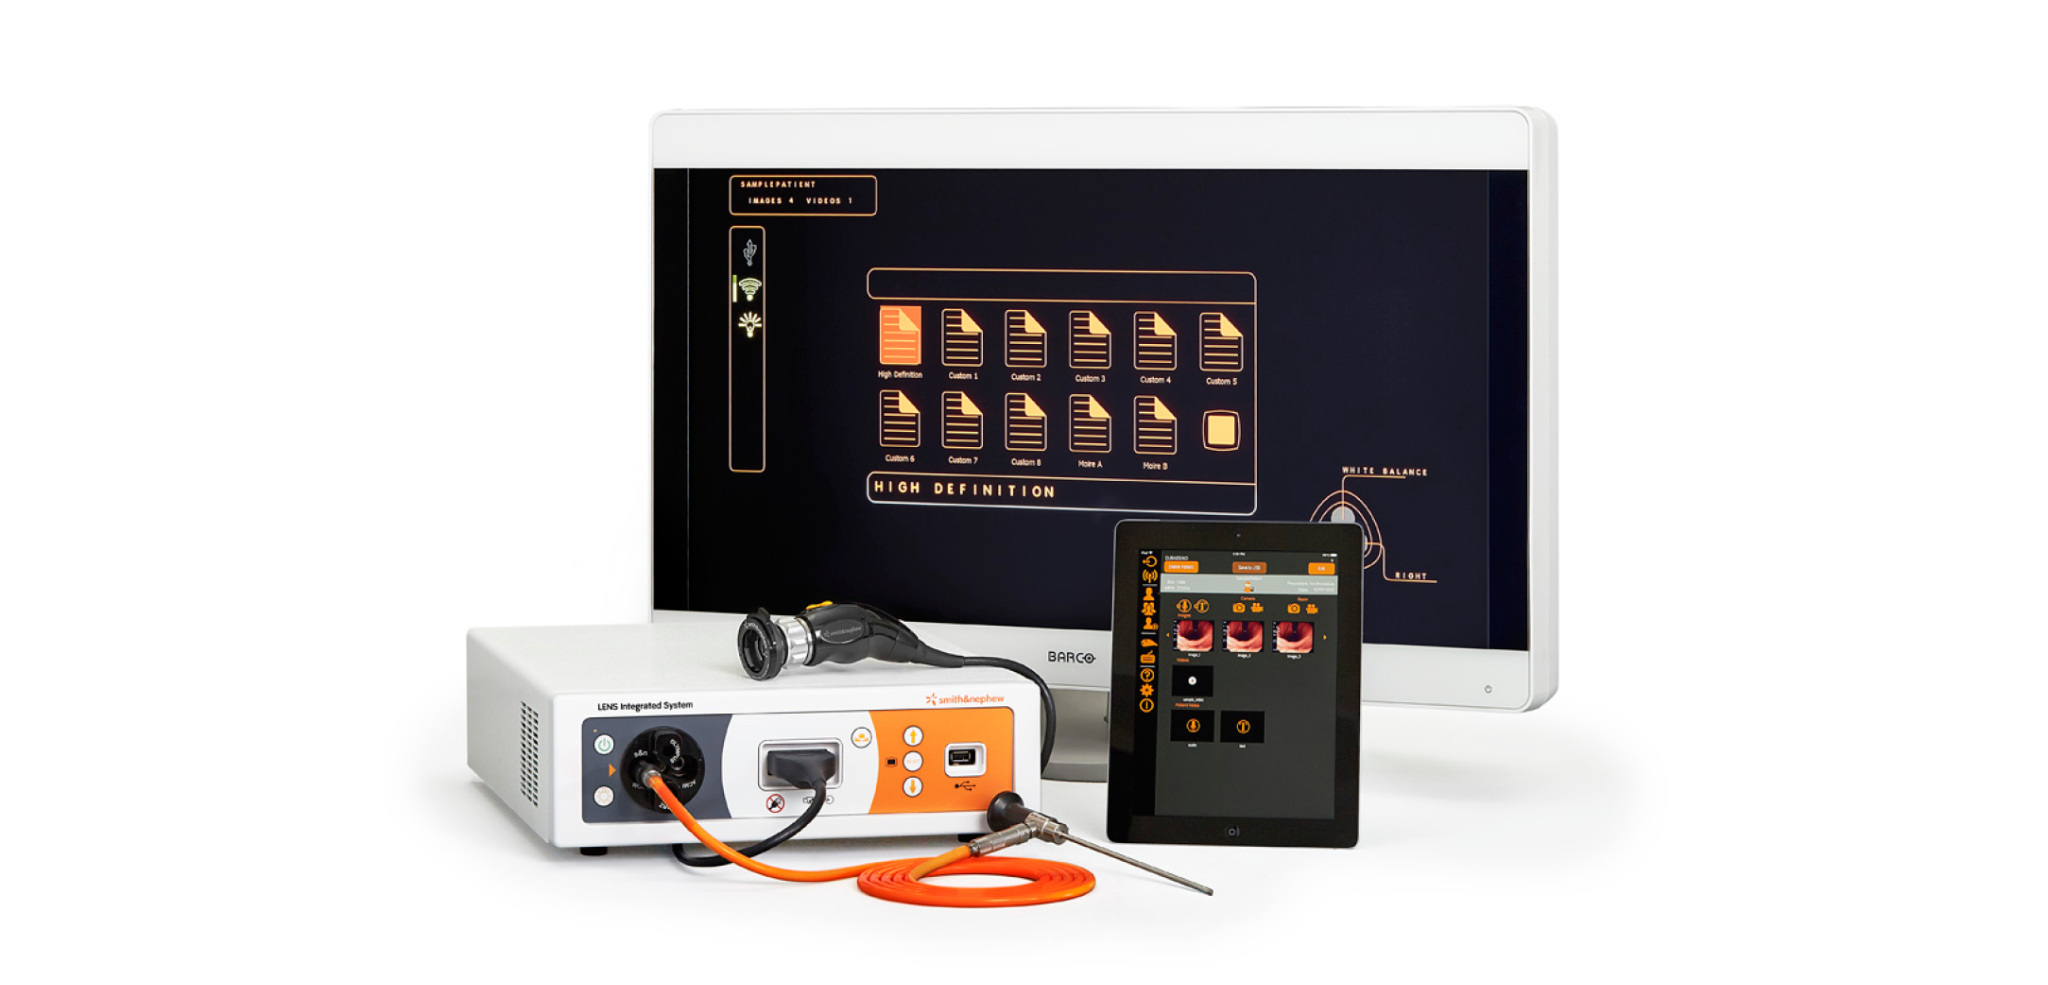 Smith and Nephew LENS Surgical Imaging System